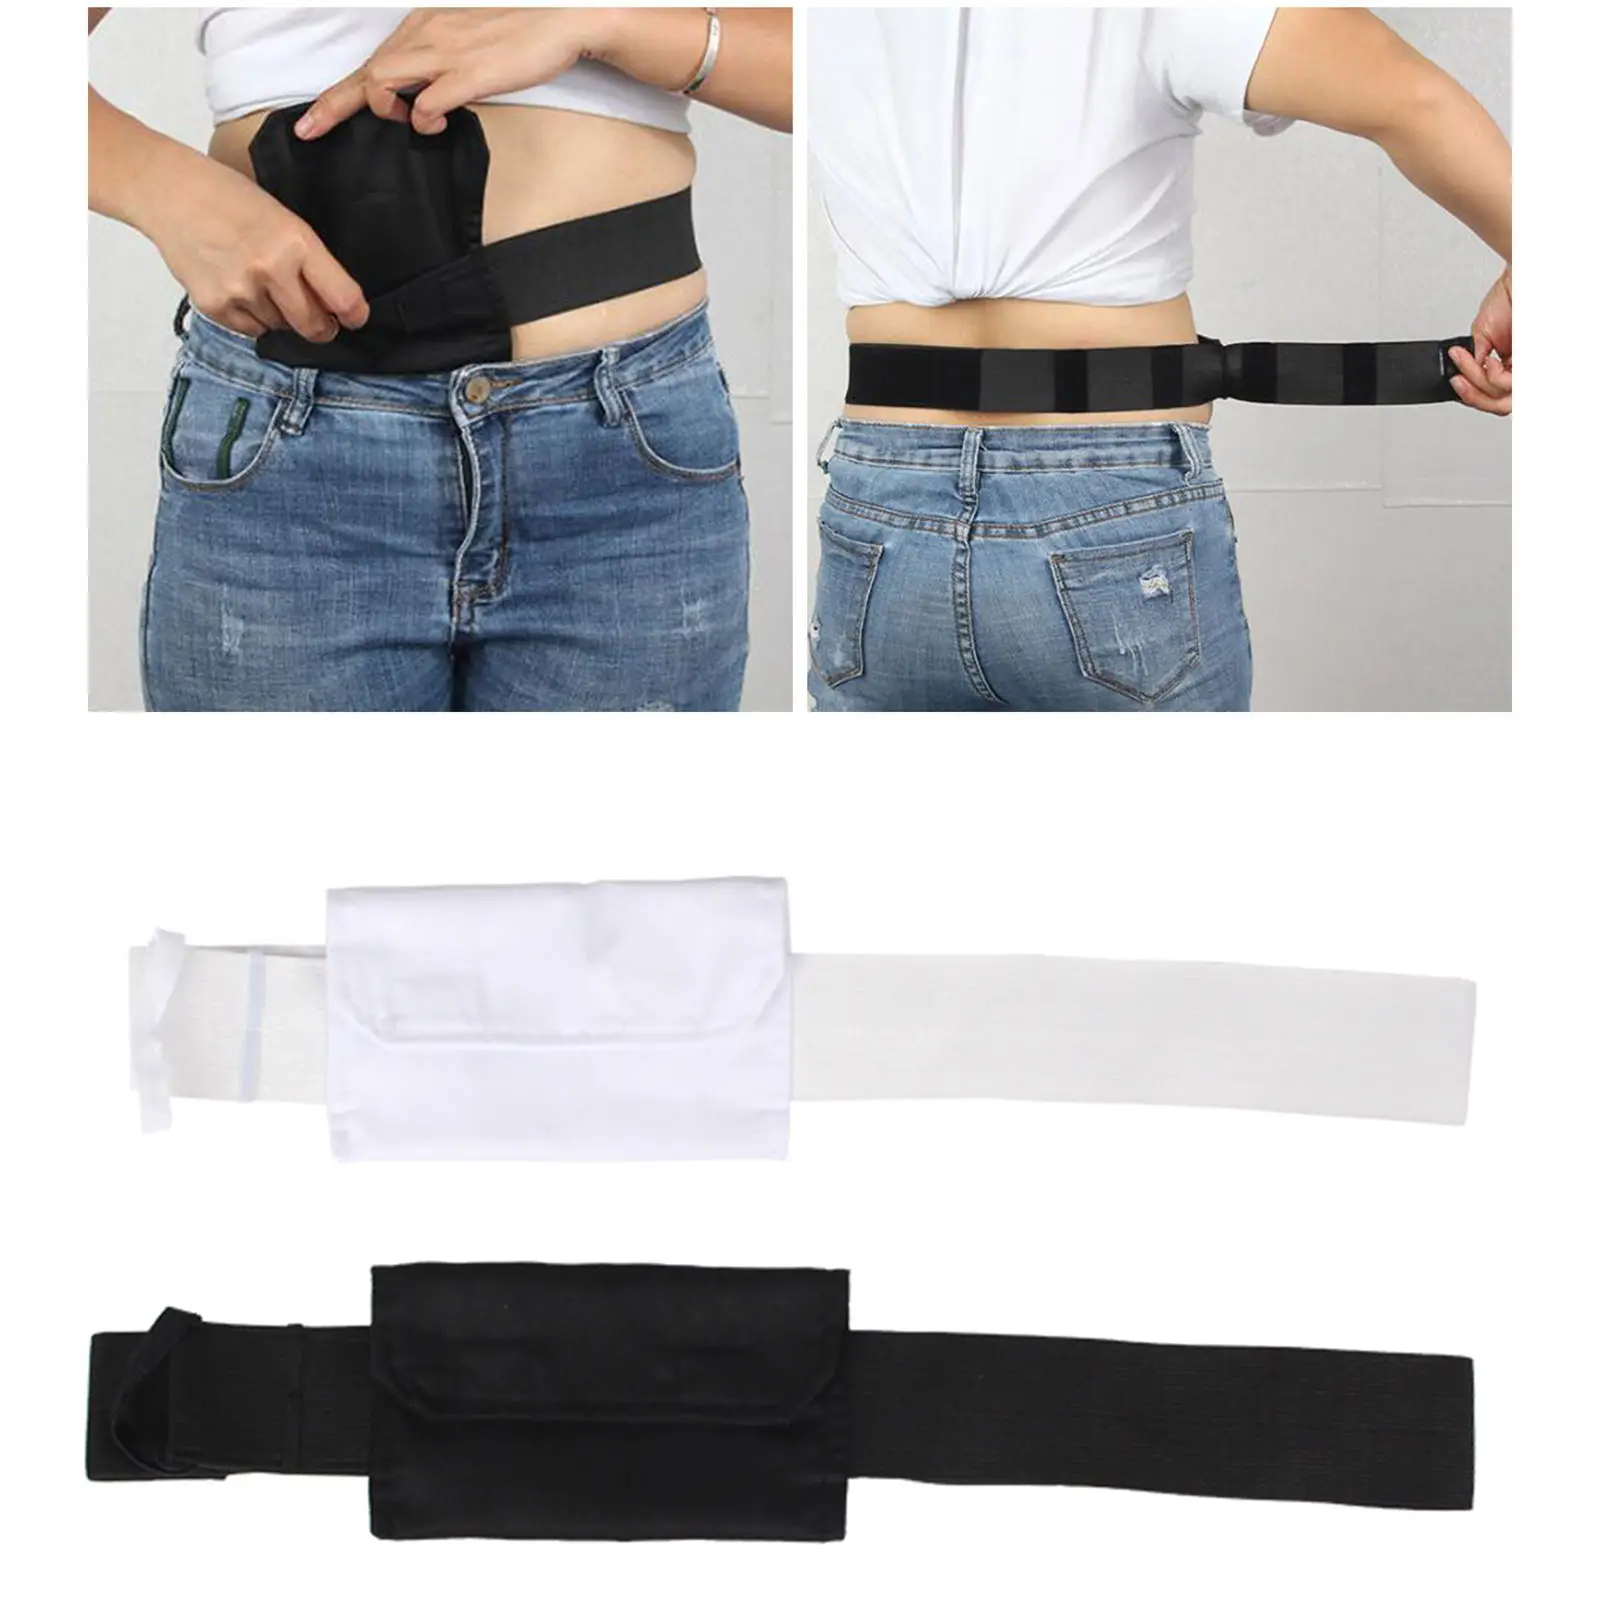 Peritoneal Dialysis PD Belt Breathable Abdominal Protection Covers Adjustable Drainage Holder Waist Belt